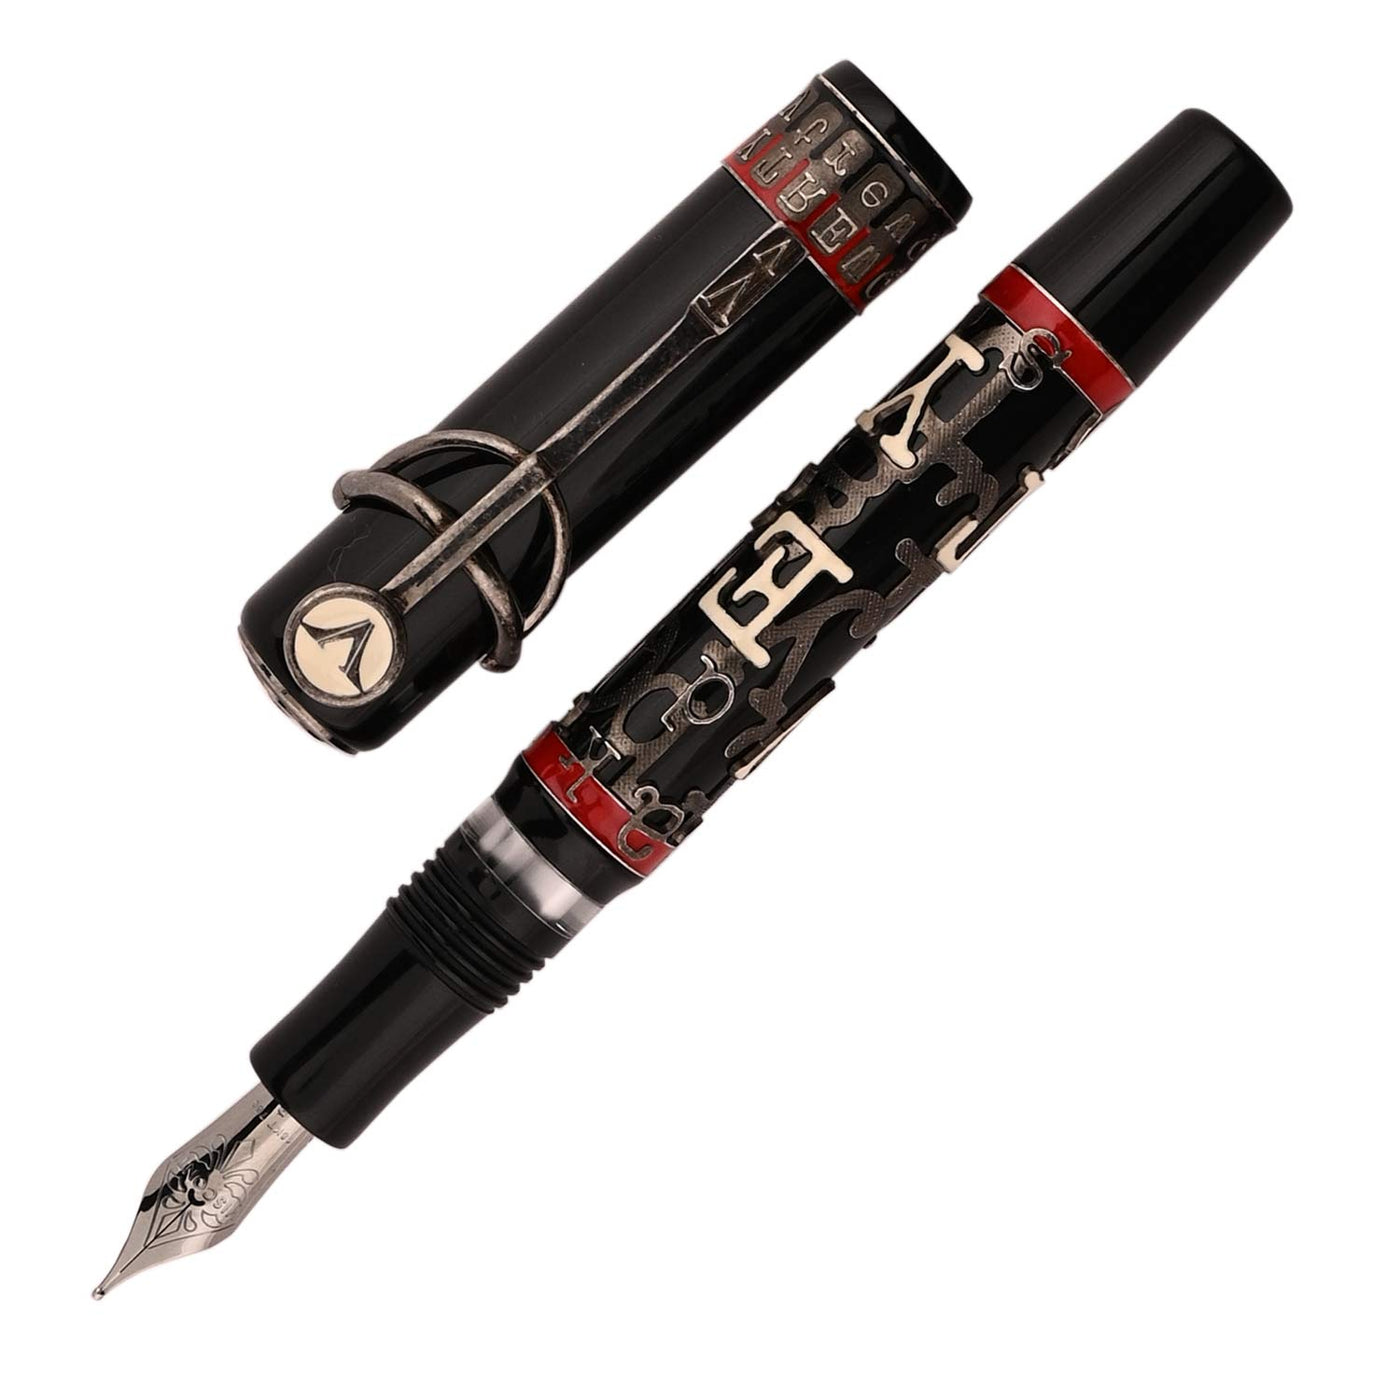 Visconti Qwerty Fountain Pen - Black (Limited Edition) 1